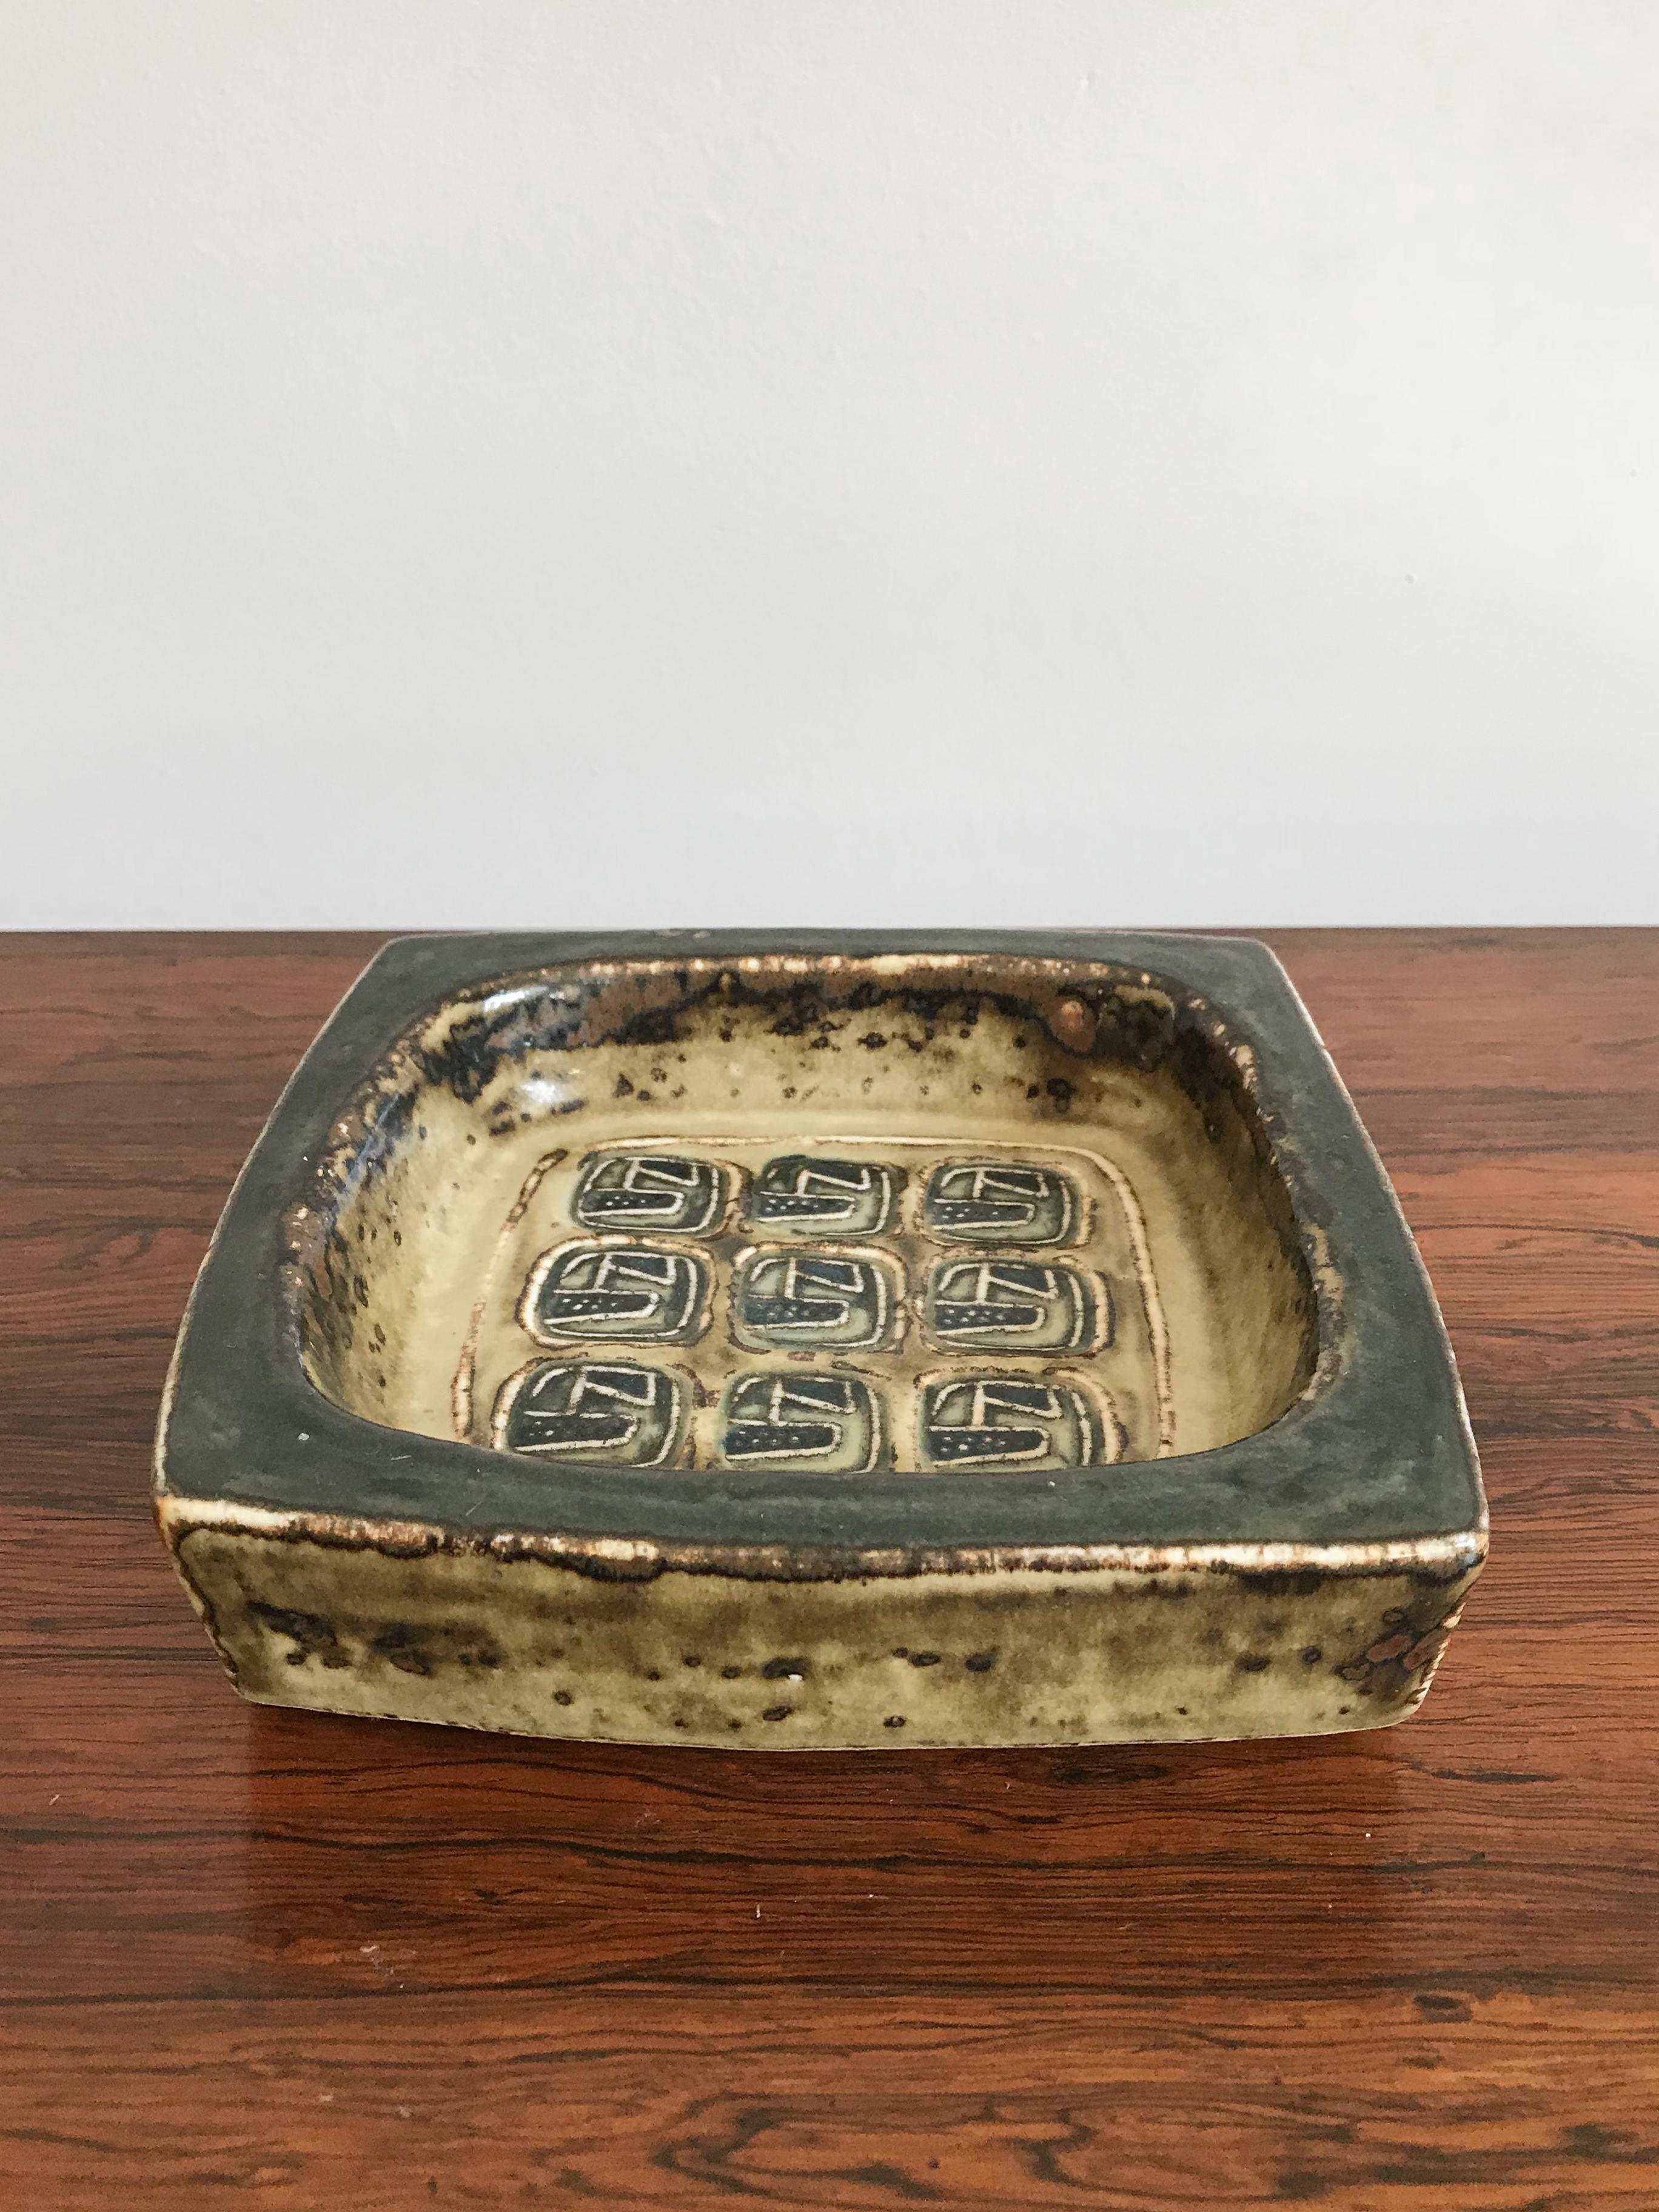 Scandinavian ashtray or centerpiece designed by Danish artist Jorgen Mogensen for Royal Copenaghen, with mark and numbering printed on the bottom, Denmark 1960s.